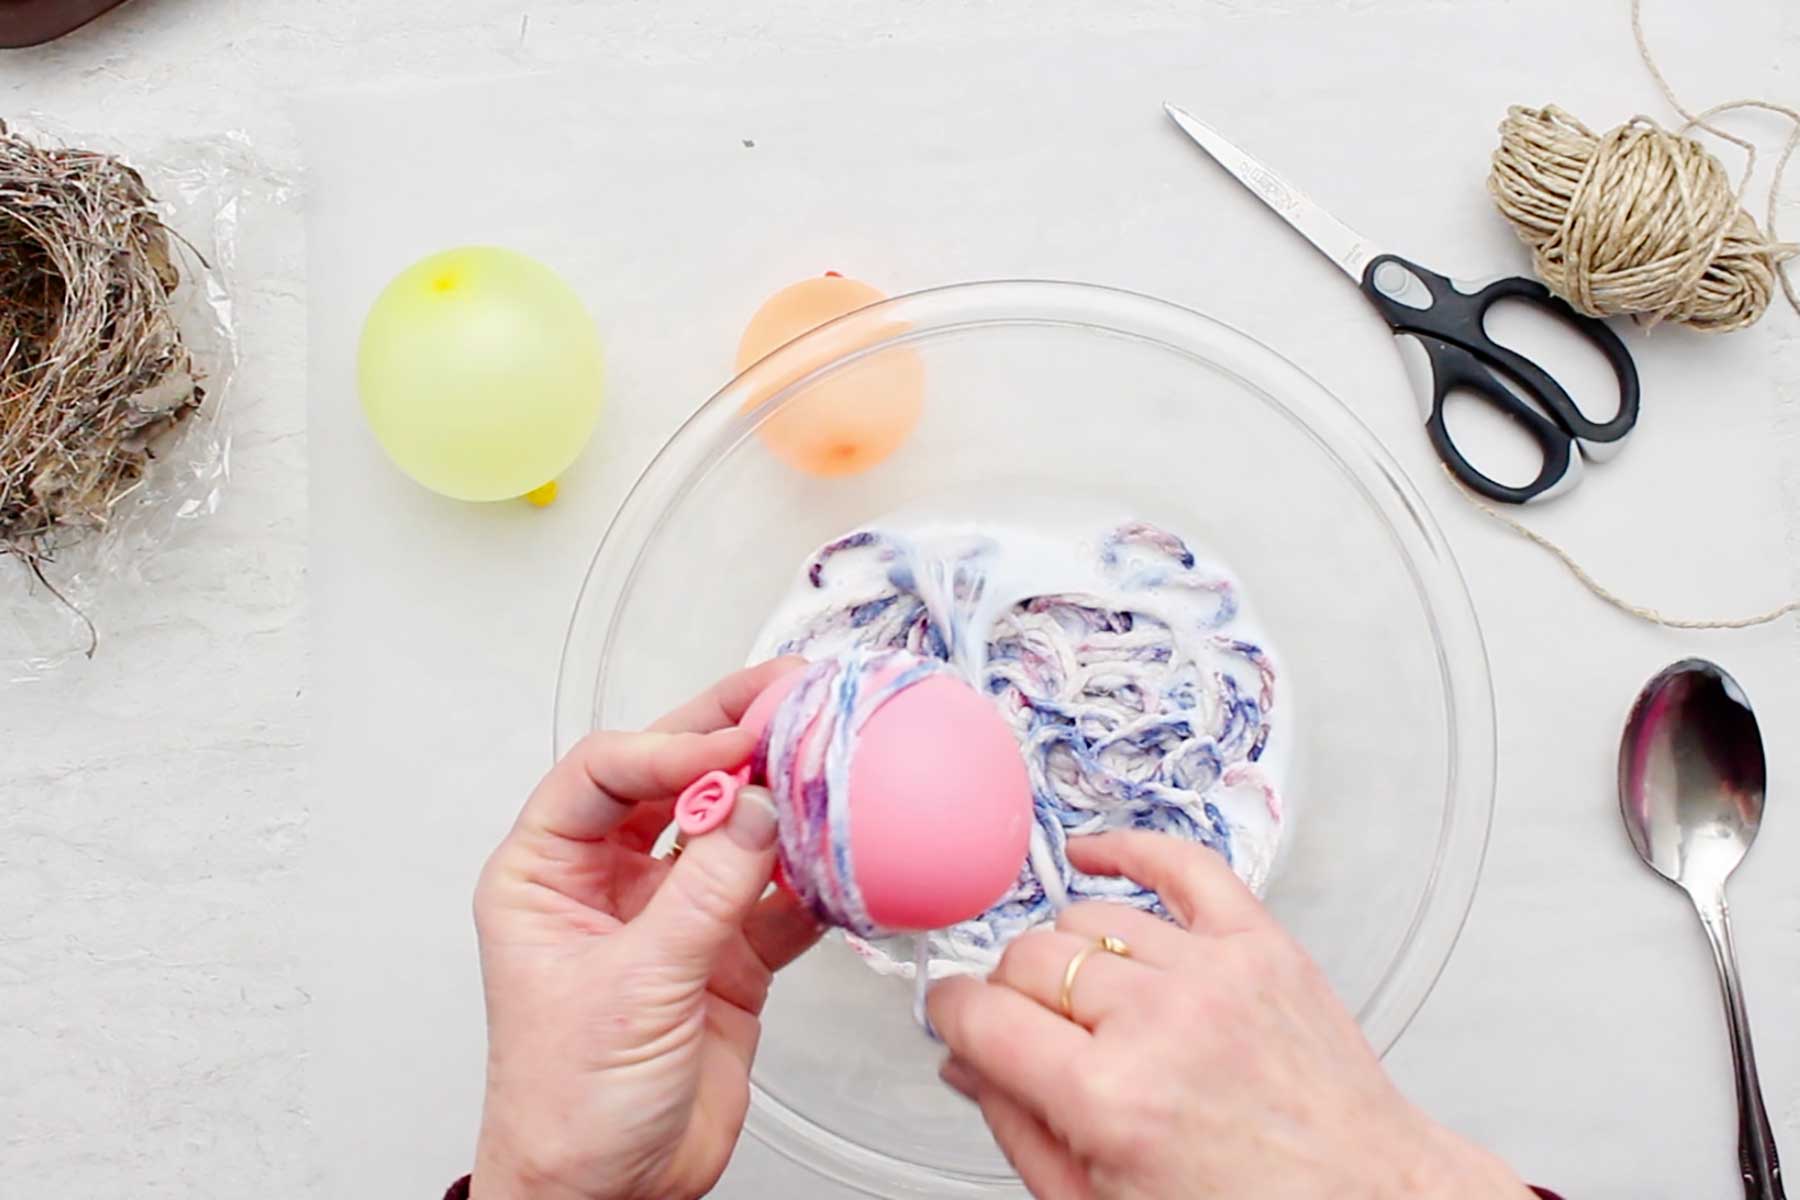 Hand winding white glue soaked yarn around a blown up pink balloon with supplies near by.